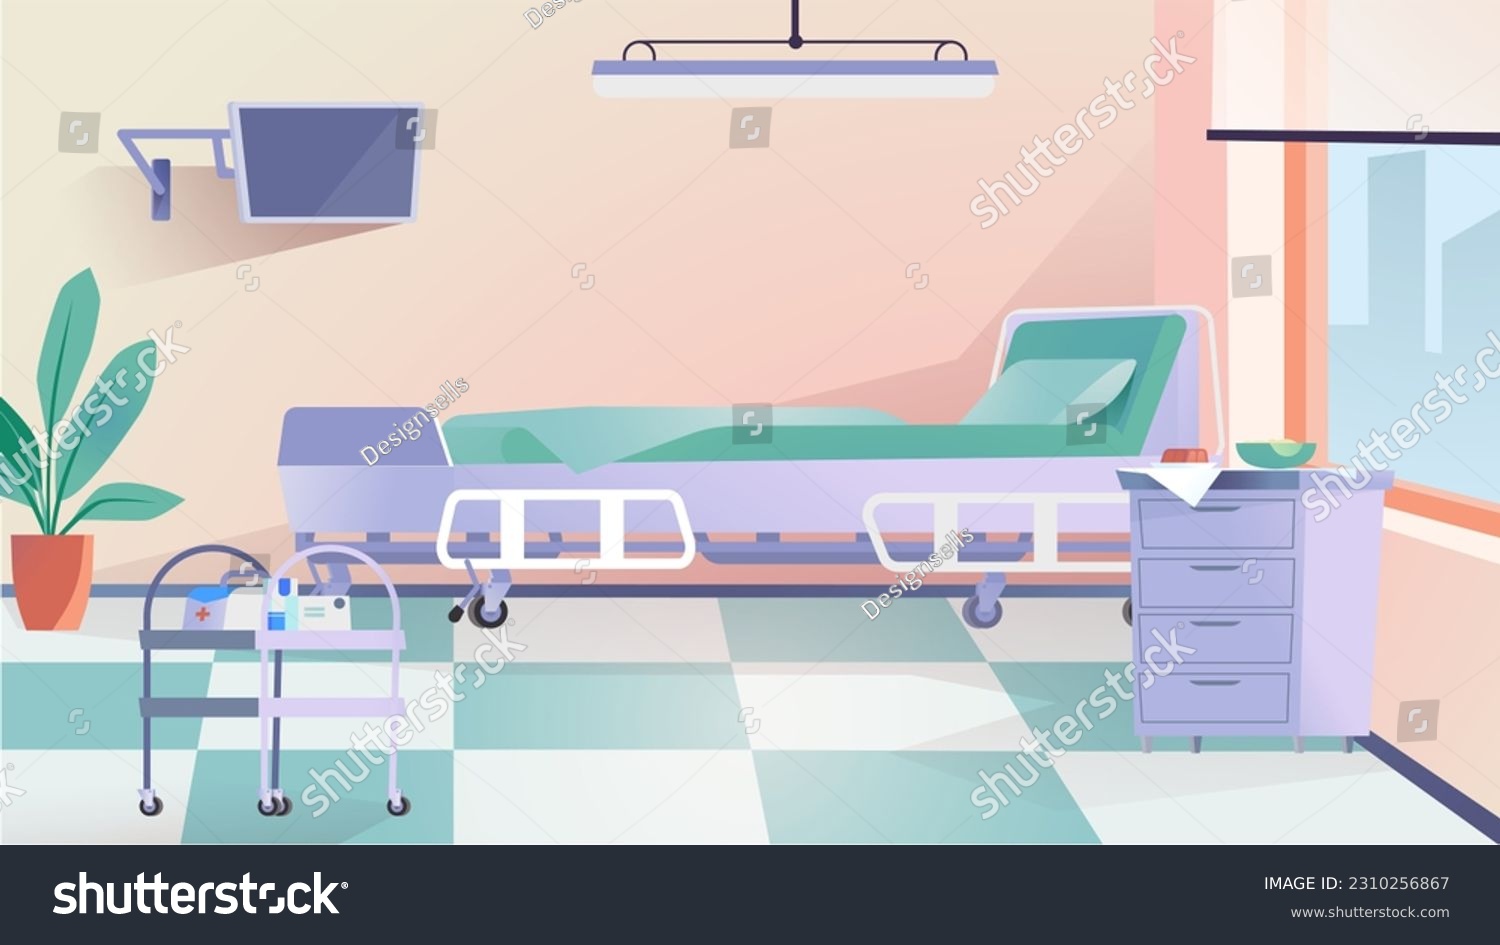 SVG of Concept Hospital room chamber. This illustration features a flat, cartoon-style design of a hospital room chamber as a background. Vector illustration. svg